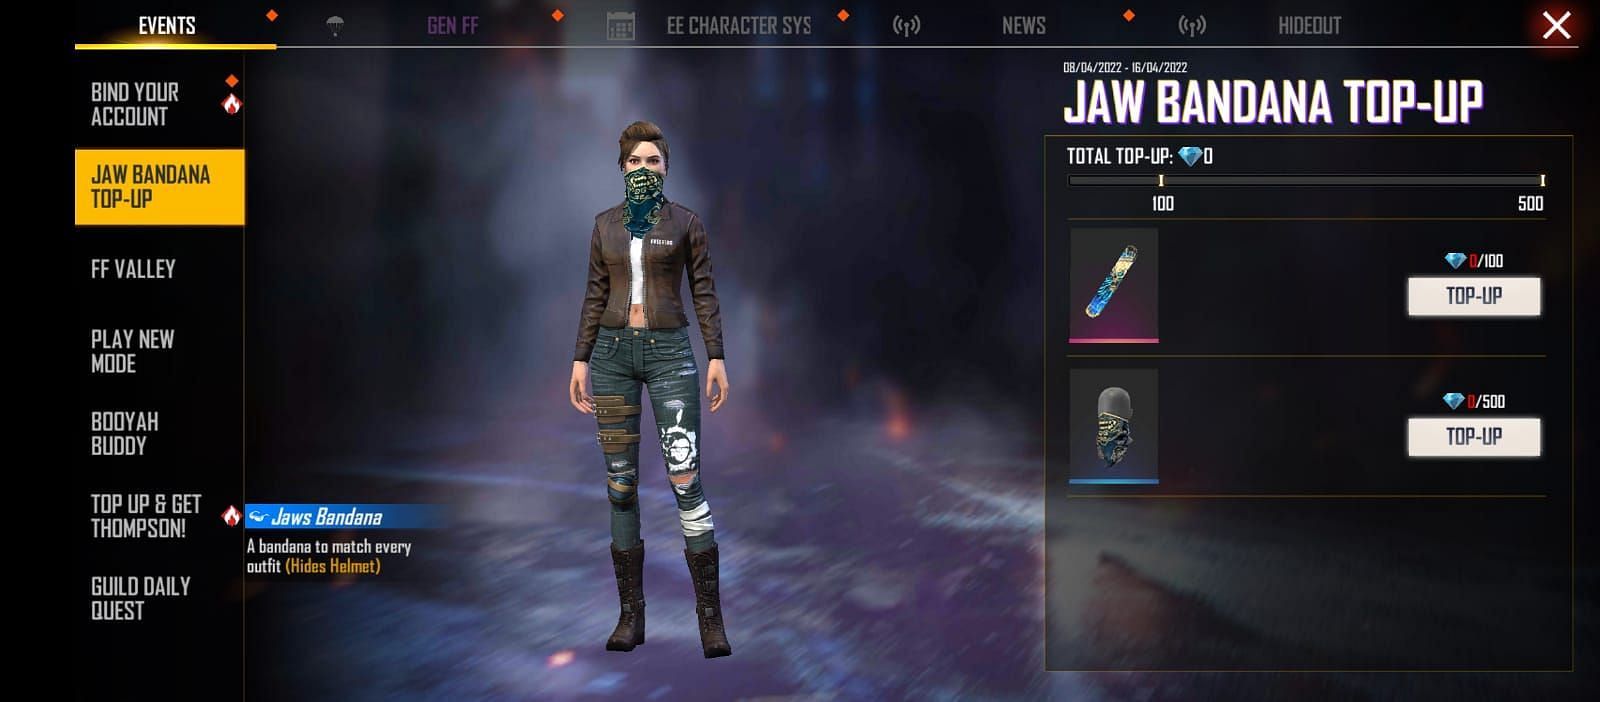 The Jaw Bandana can be claimed by topping up 500 diamonds (Image via Garena)